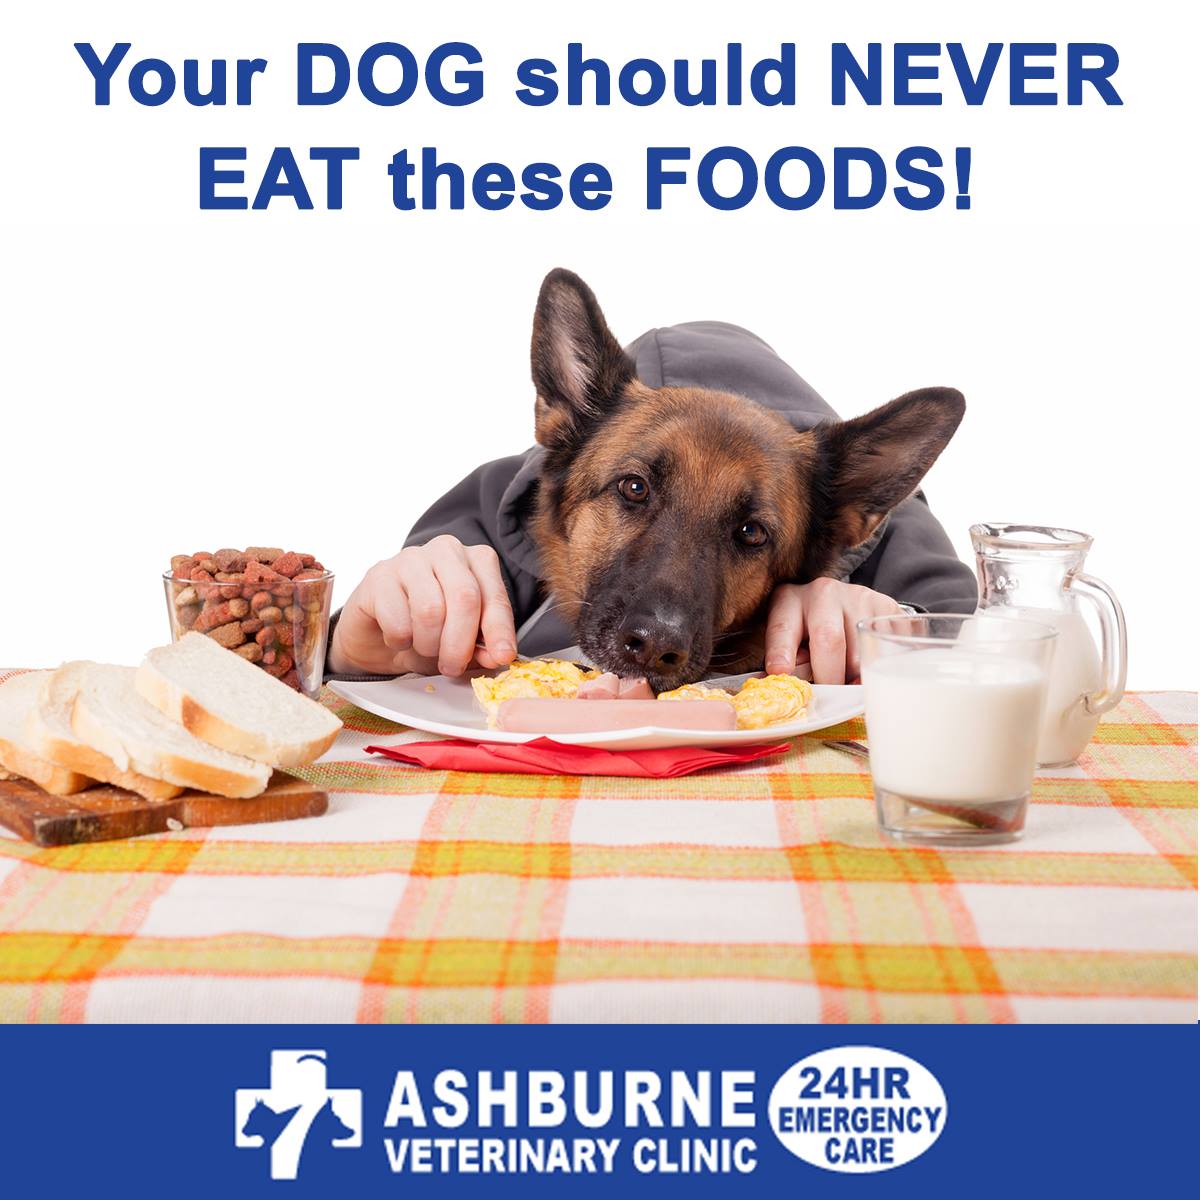 Foods that you should never feed your dog. EVER!